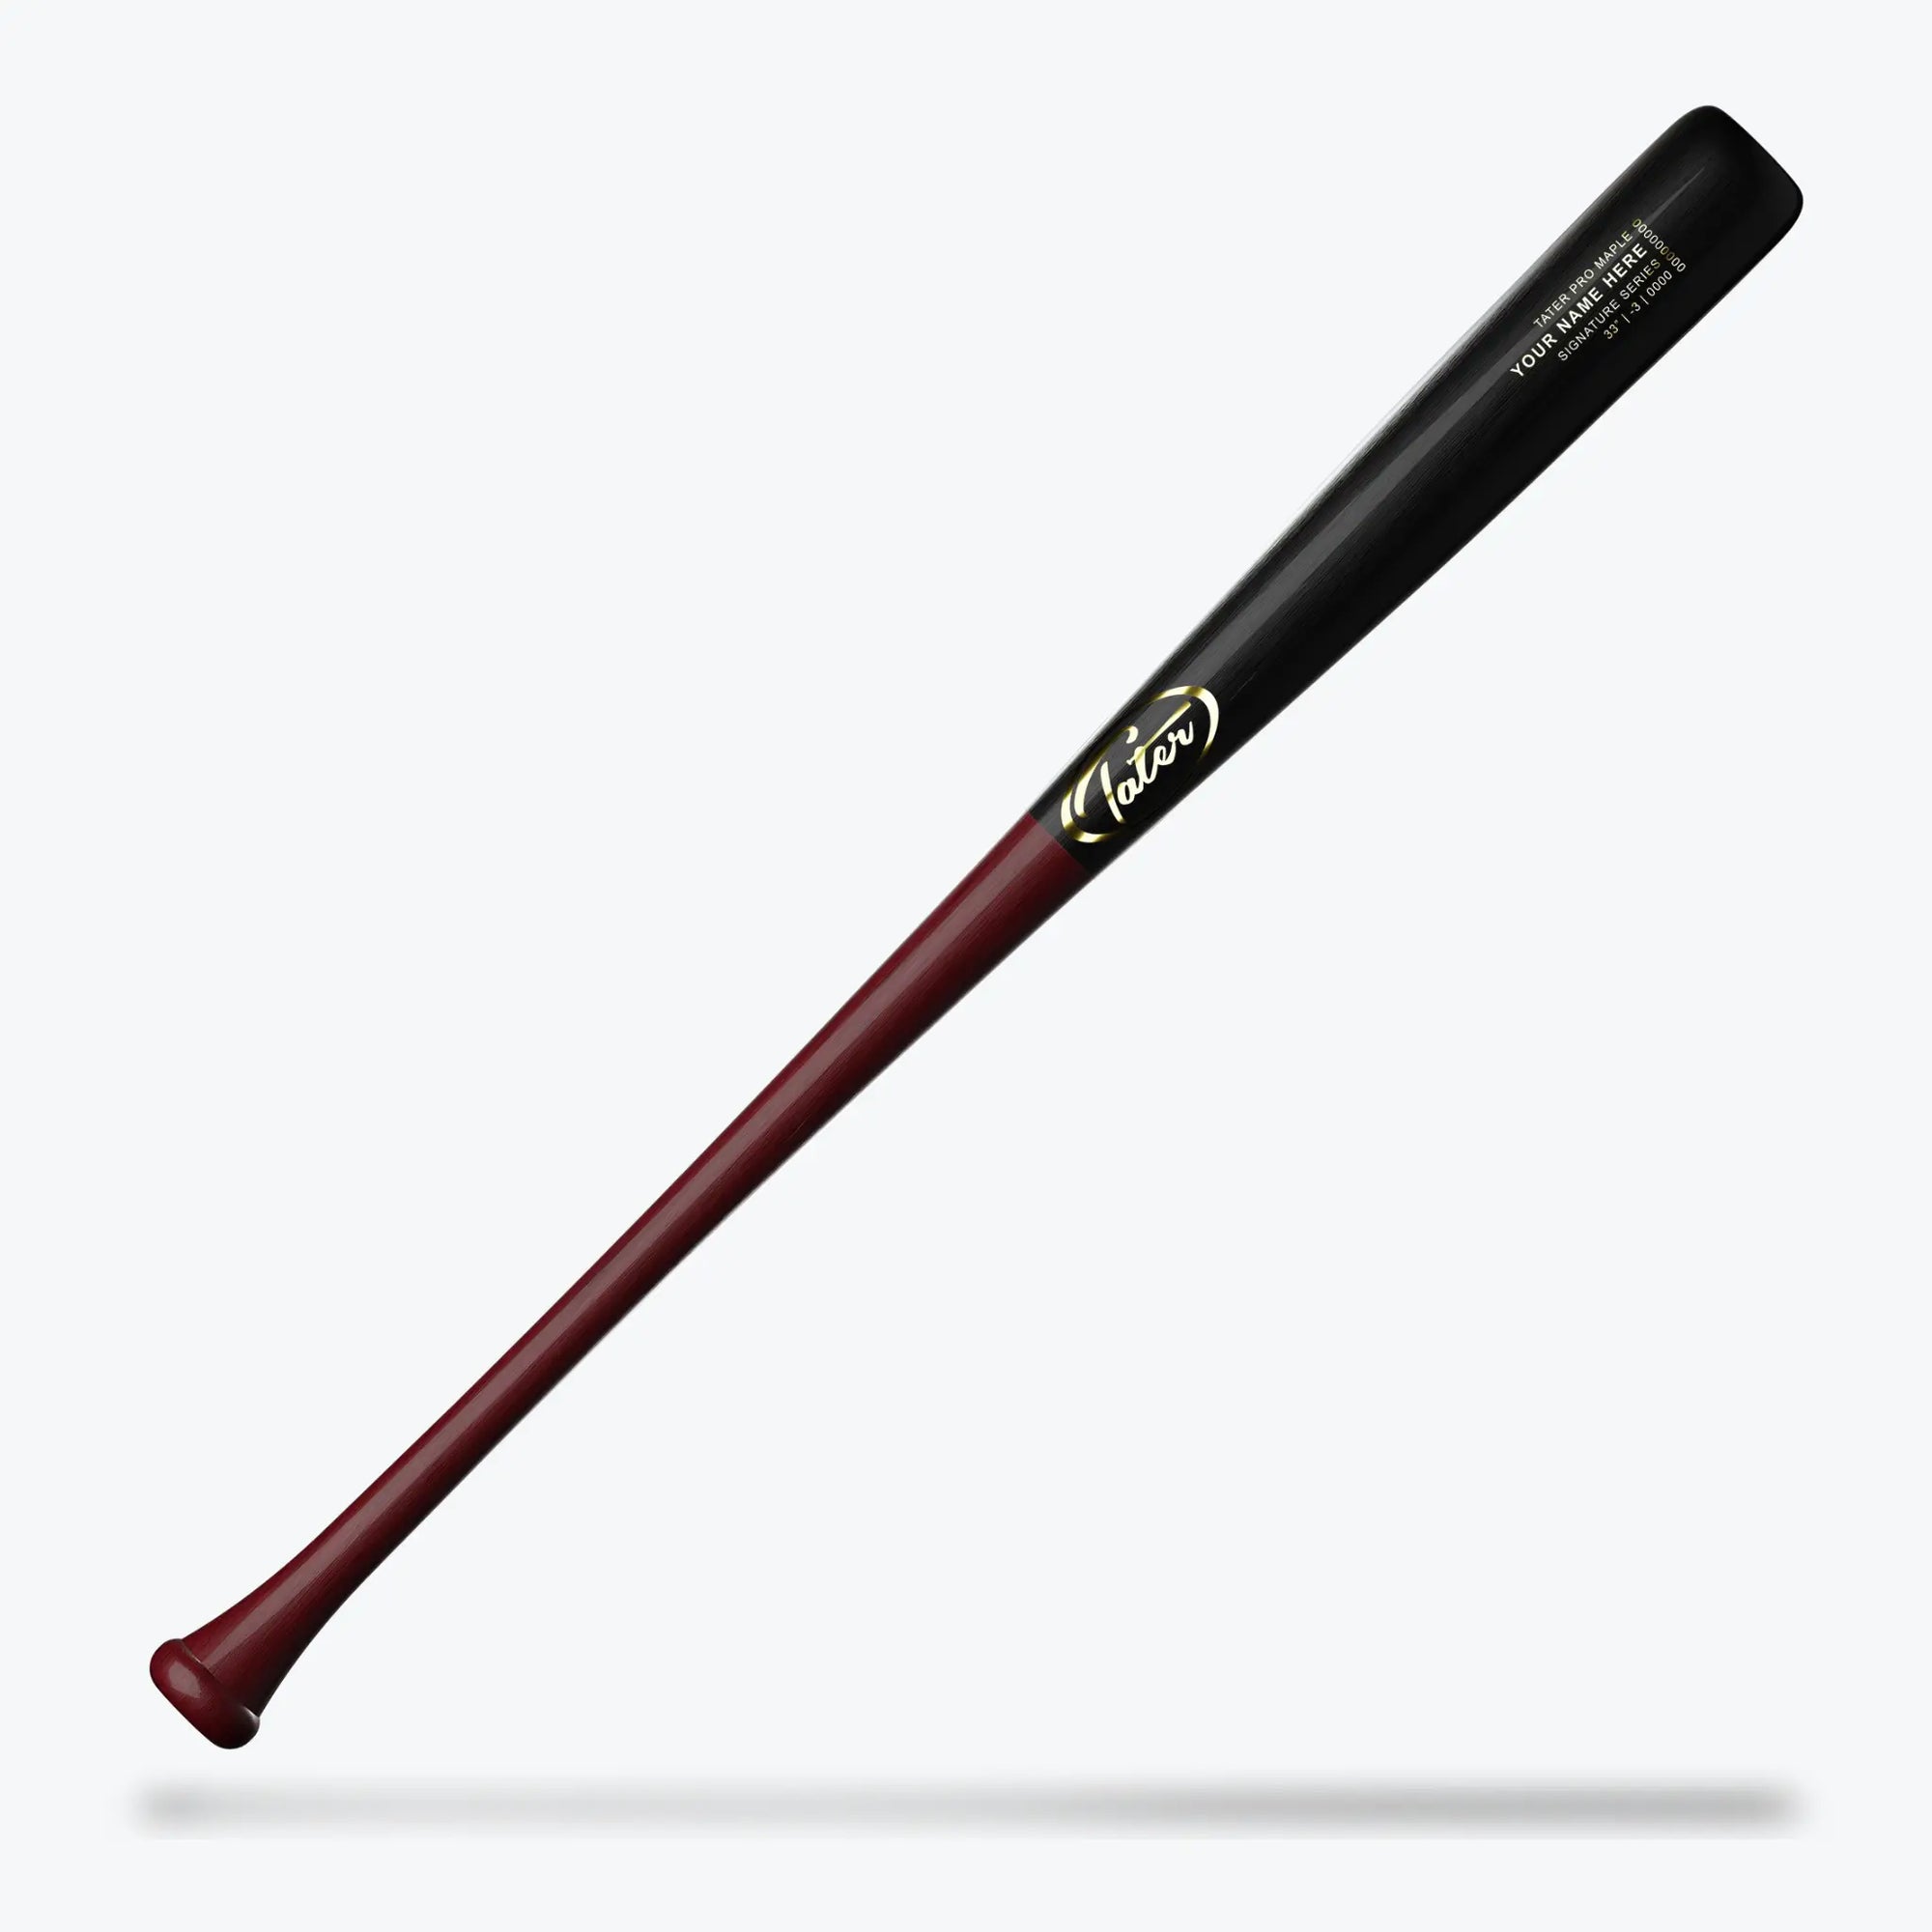 Depicted in the image is a Tater 271 custom wood bat, 31 to 33 inches with a balanced drop 3. It boasts a deep burgundy handle that elegantly fades into a black barrel, adorned with the Tater logo in gold, presenting a stylish Louisville Slugger alternative for discerning players.